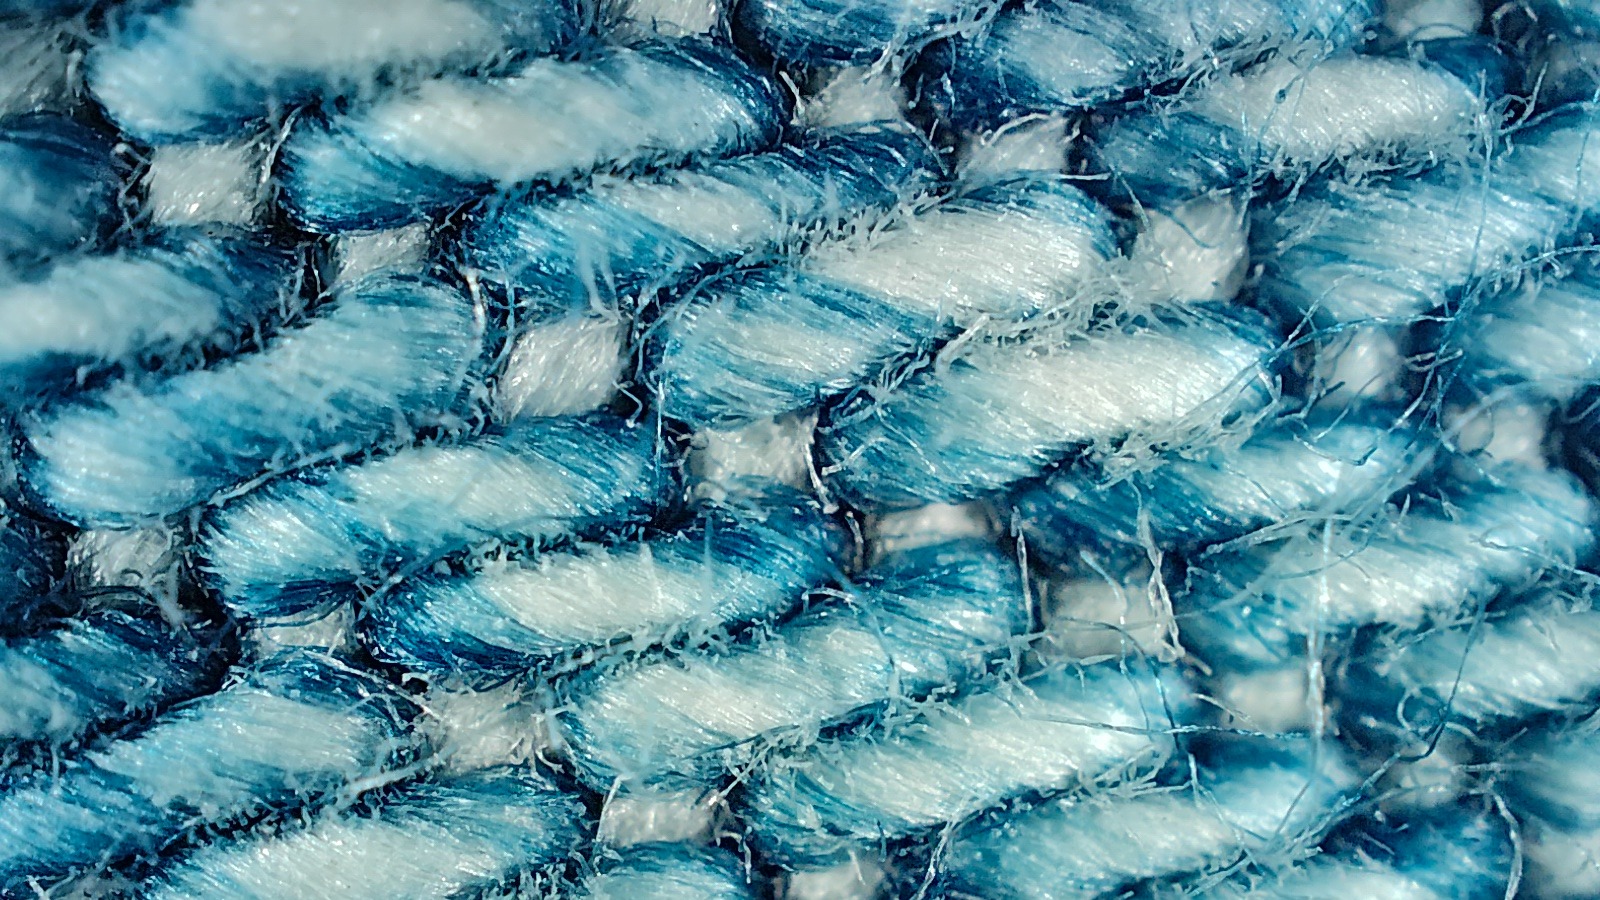 Microscopic picture of a pair of jeans taken using the Realme GT 2 Pro